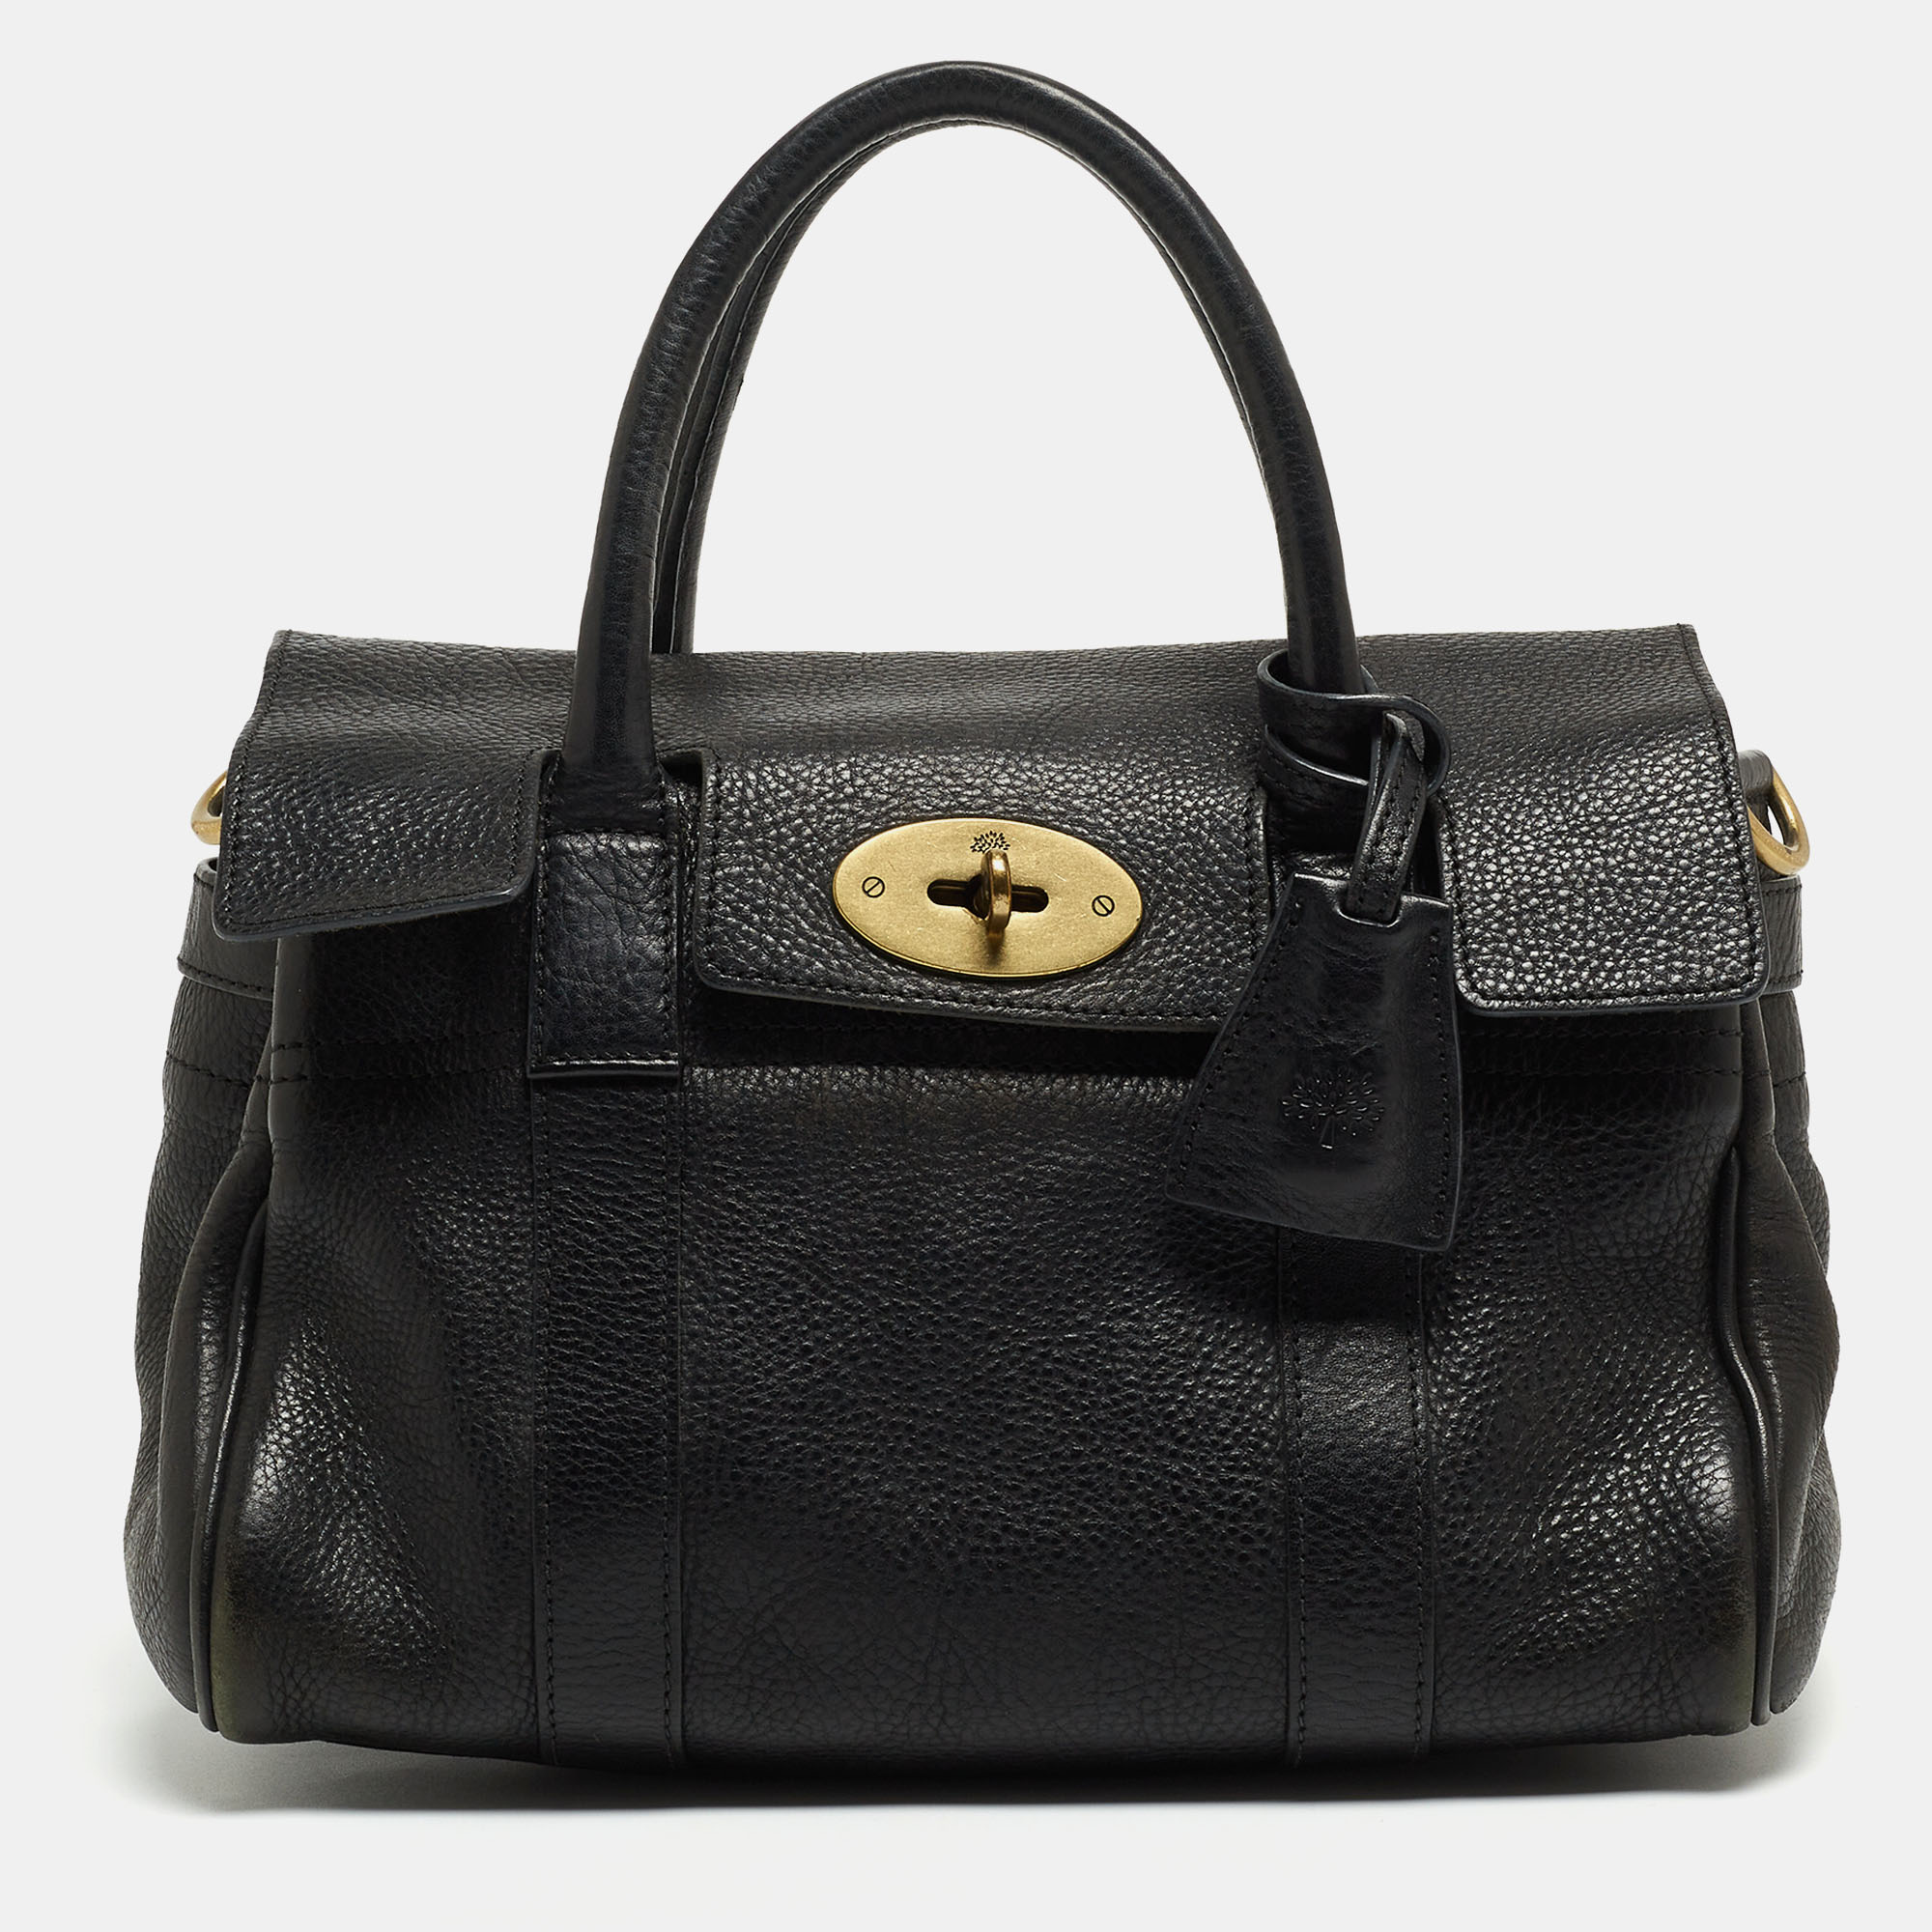 Pre-owned Mulberry Black Grain Leather Small Bayswater Satchel